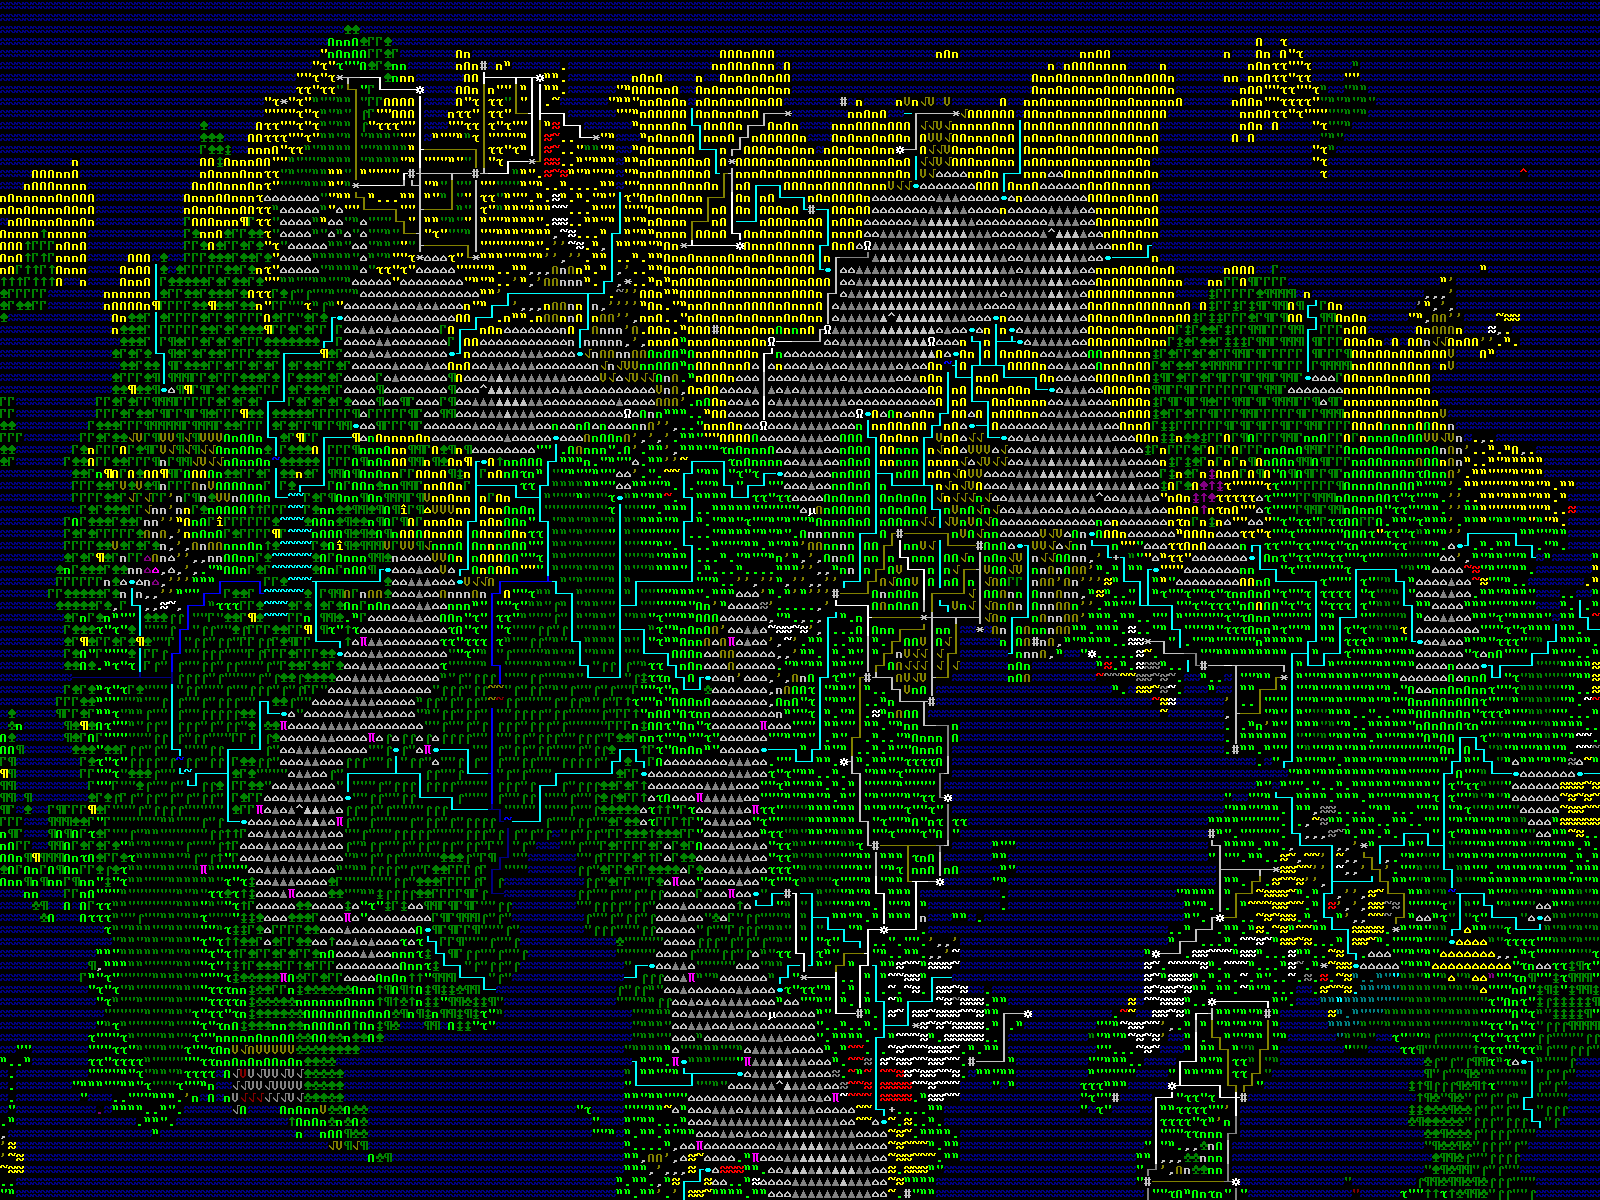 Dwarf Fortress is getting an HD remaster, and is coming to Steam